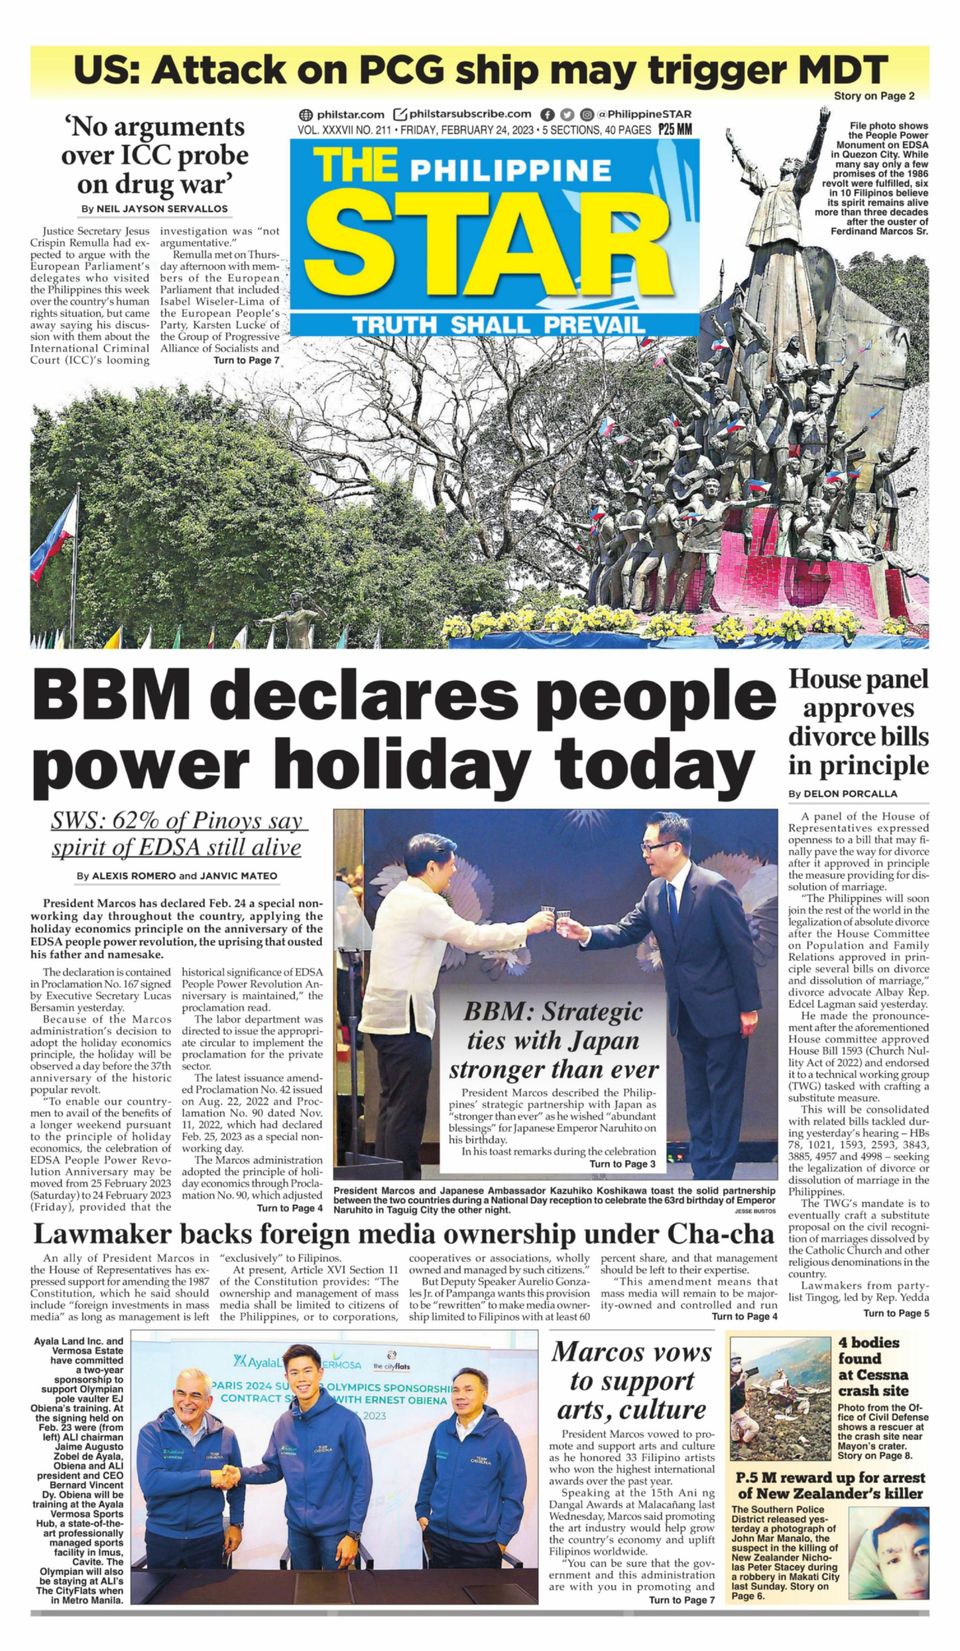 915917 The Philippine Star Cover February 24 2023 Issue 